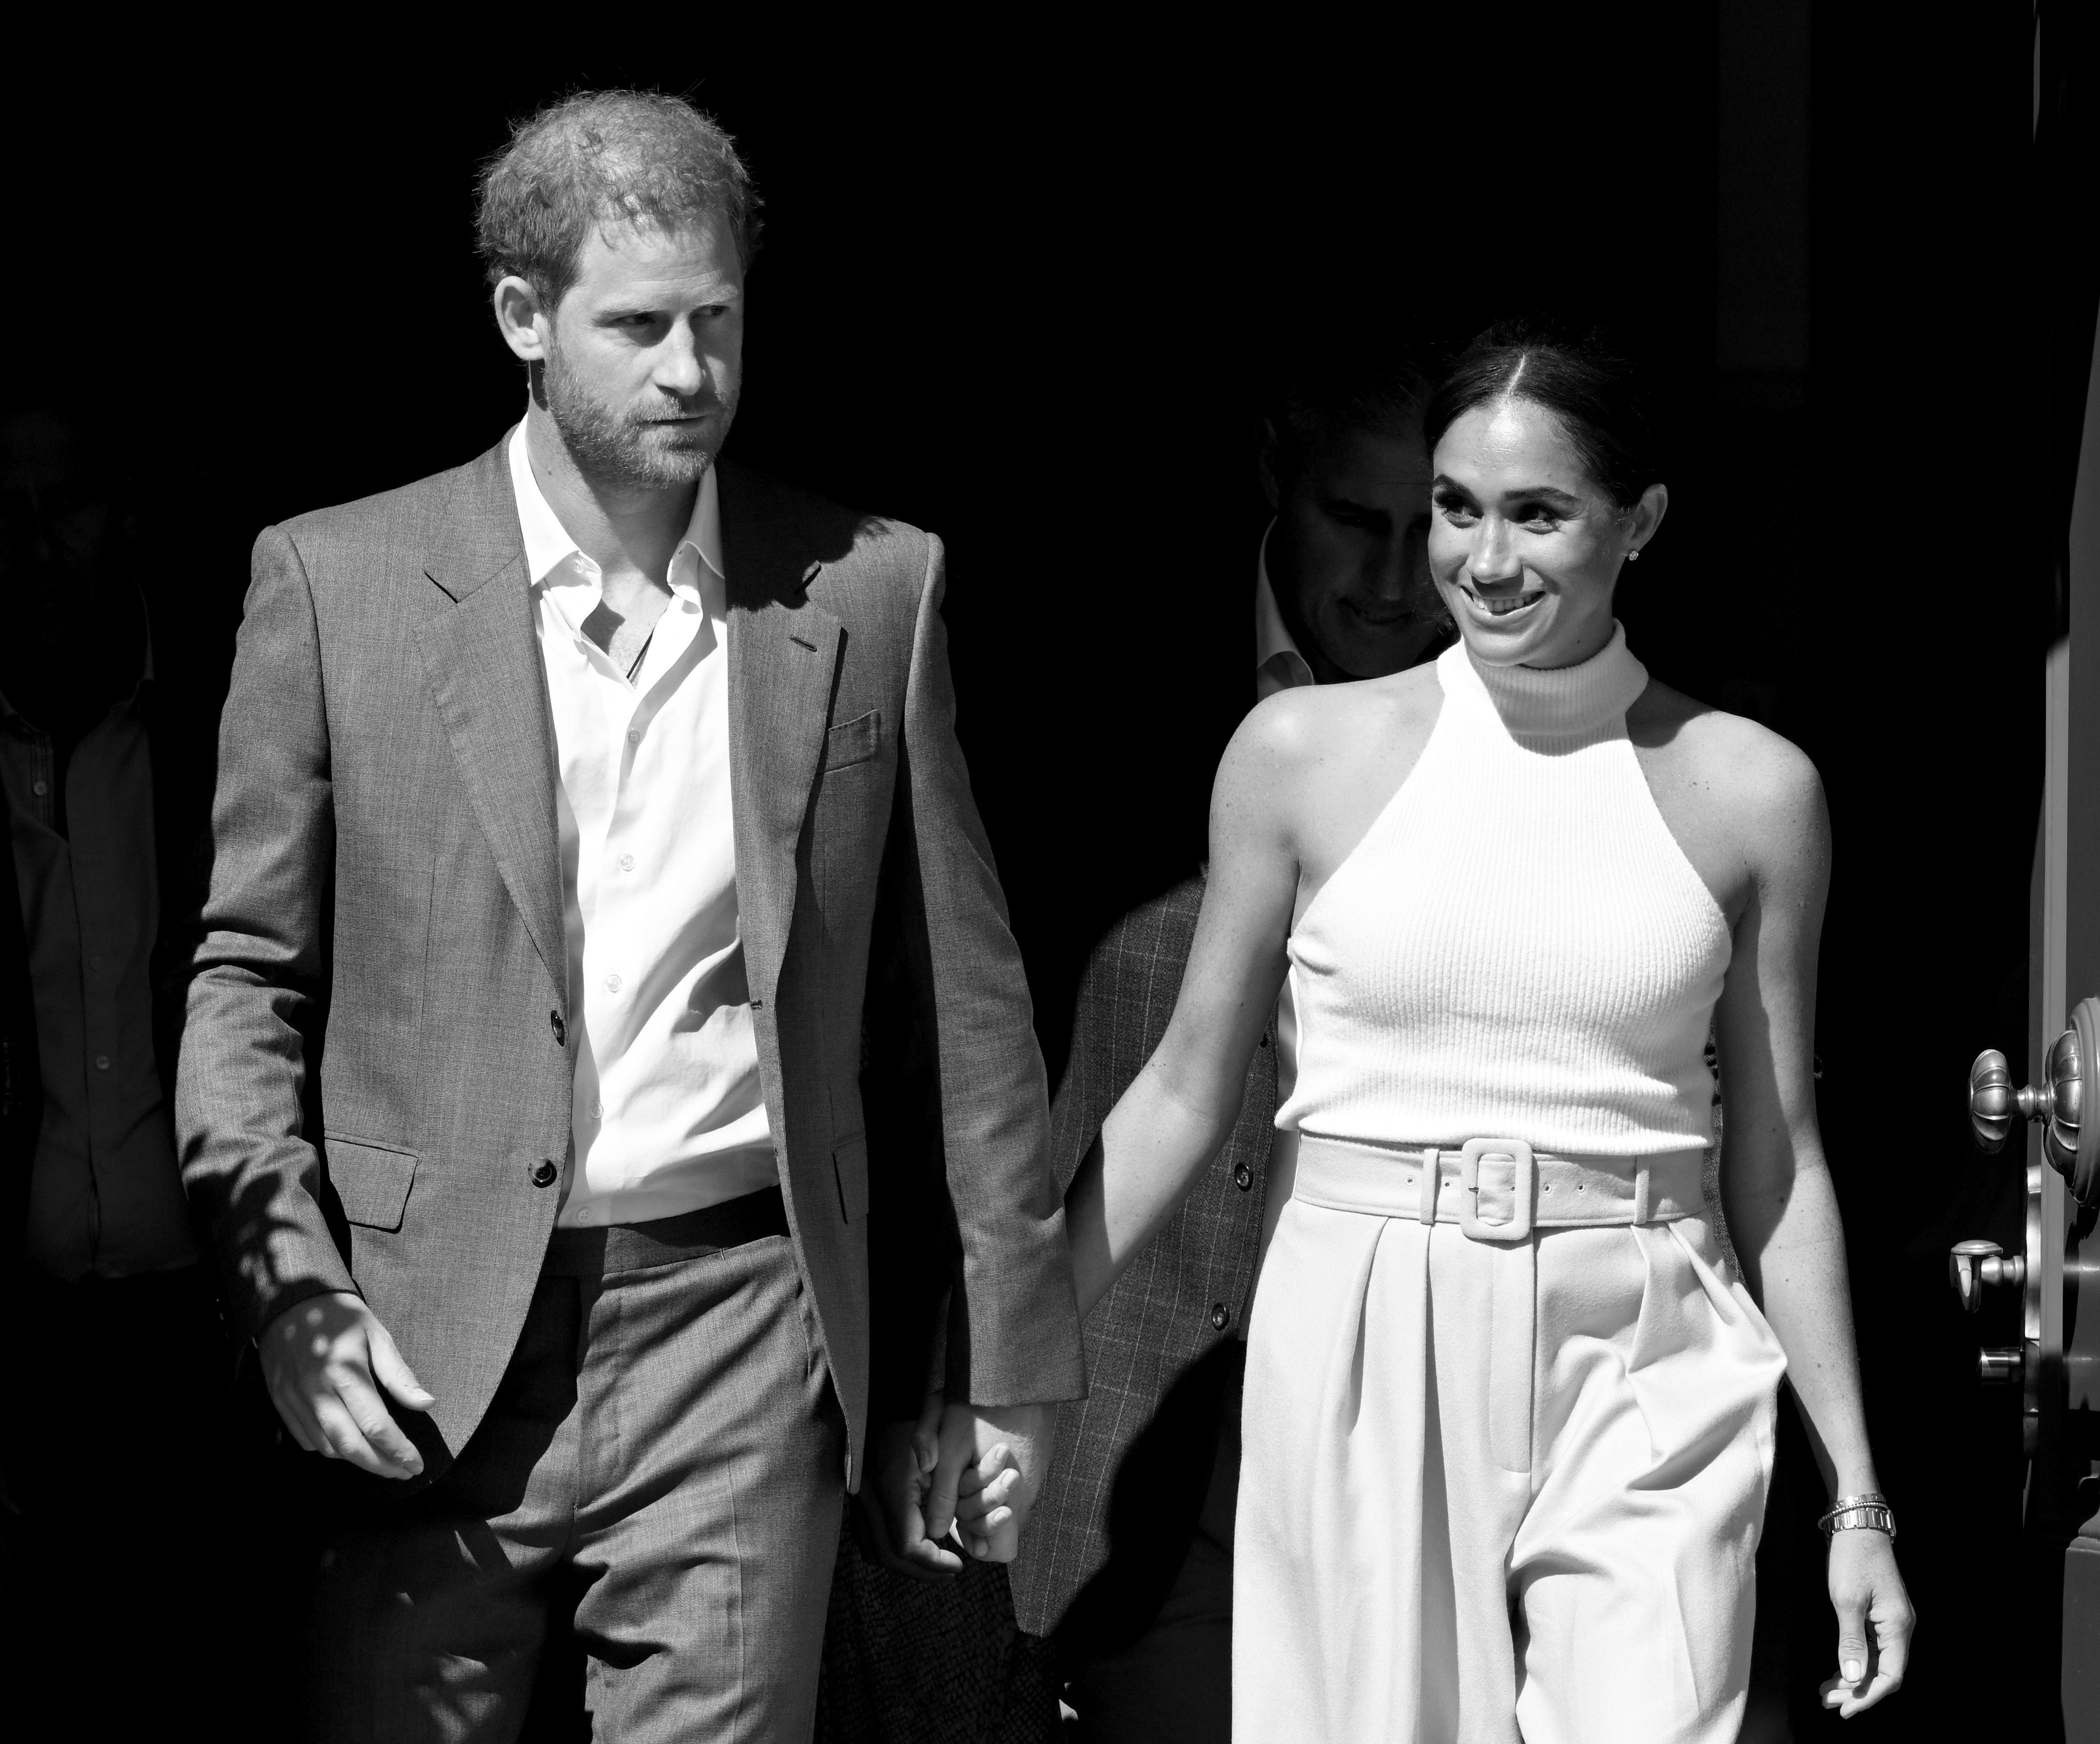 Meghan's obsession with wide-legged trousers continues